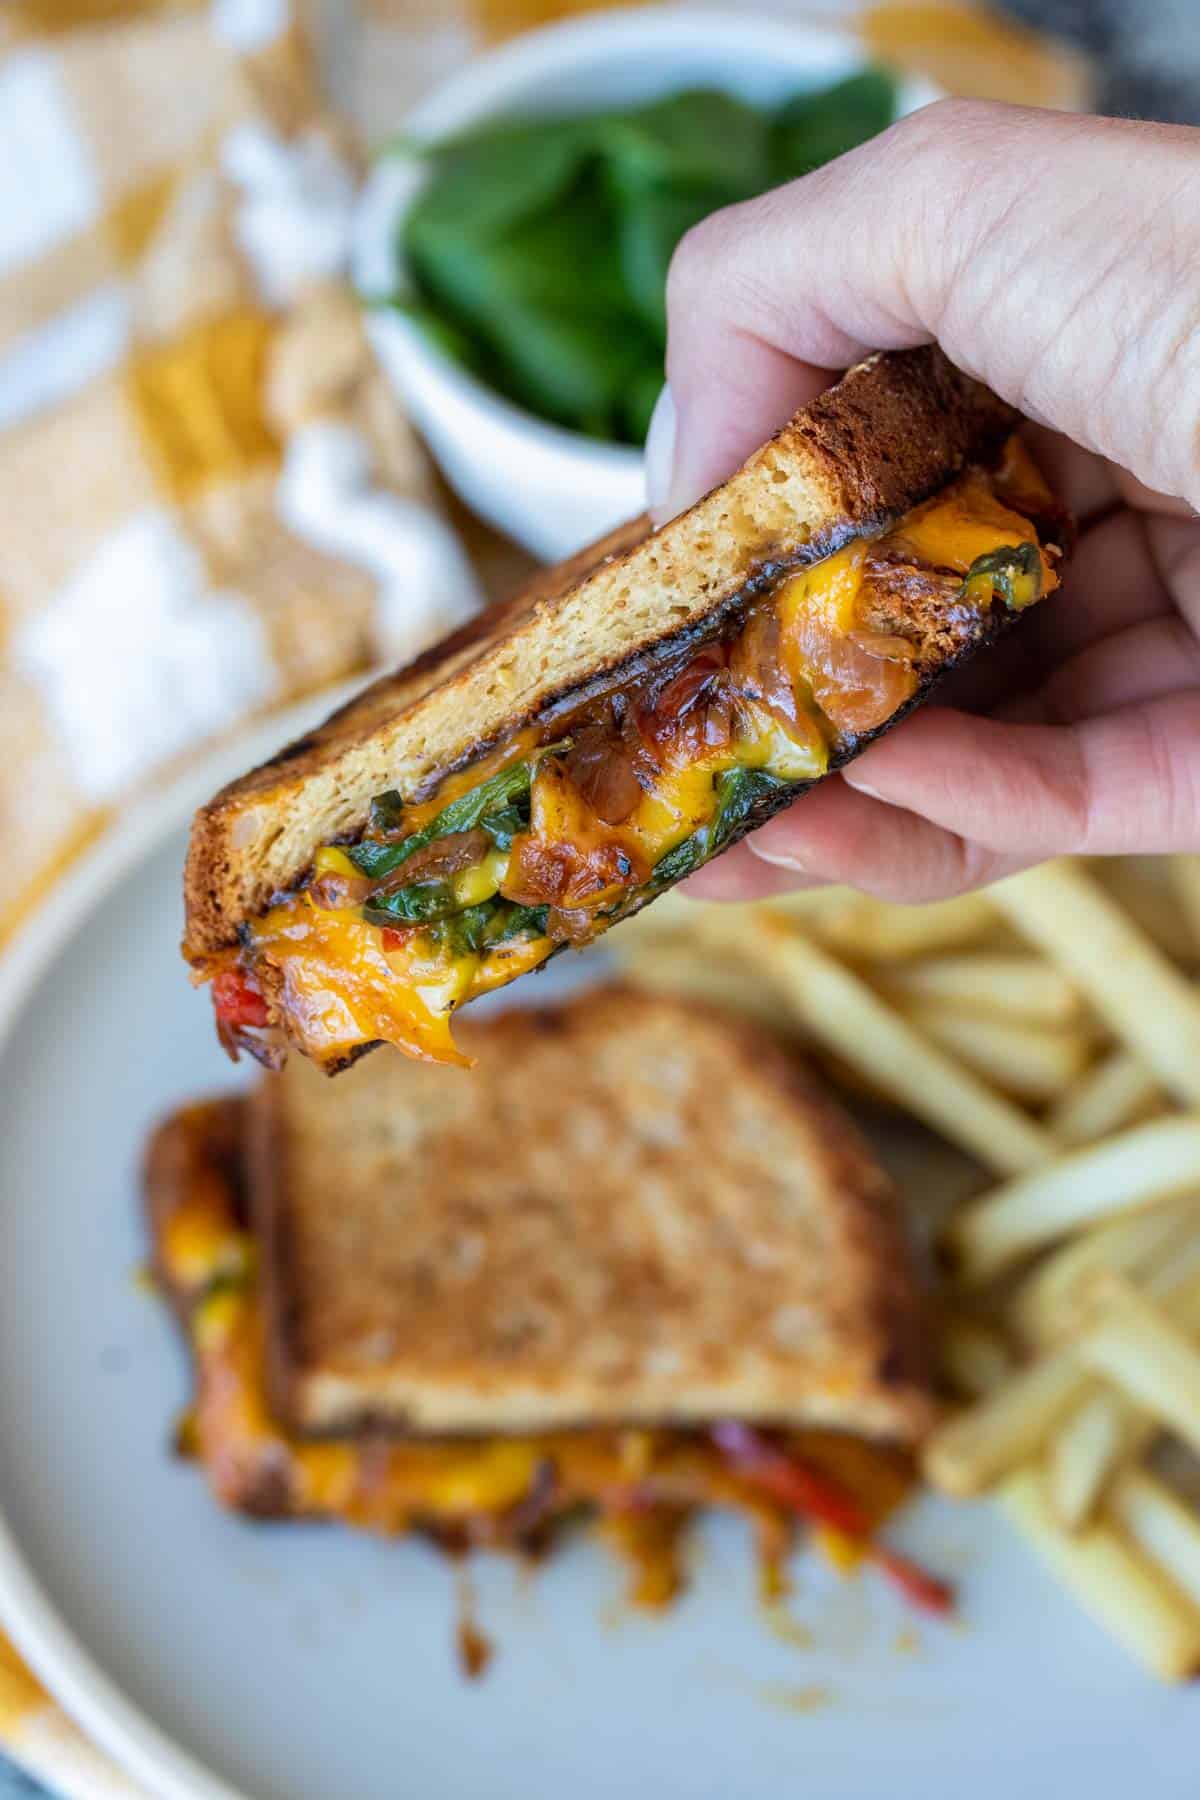 A hand holding half of a grilled cheese with veggies over a plate with the other half